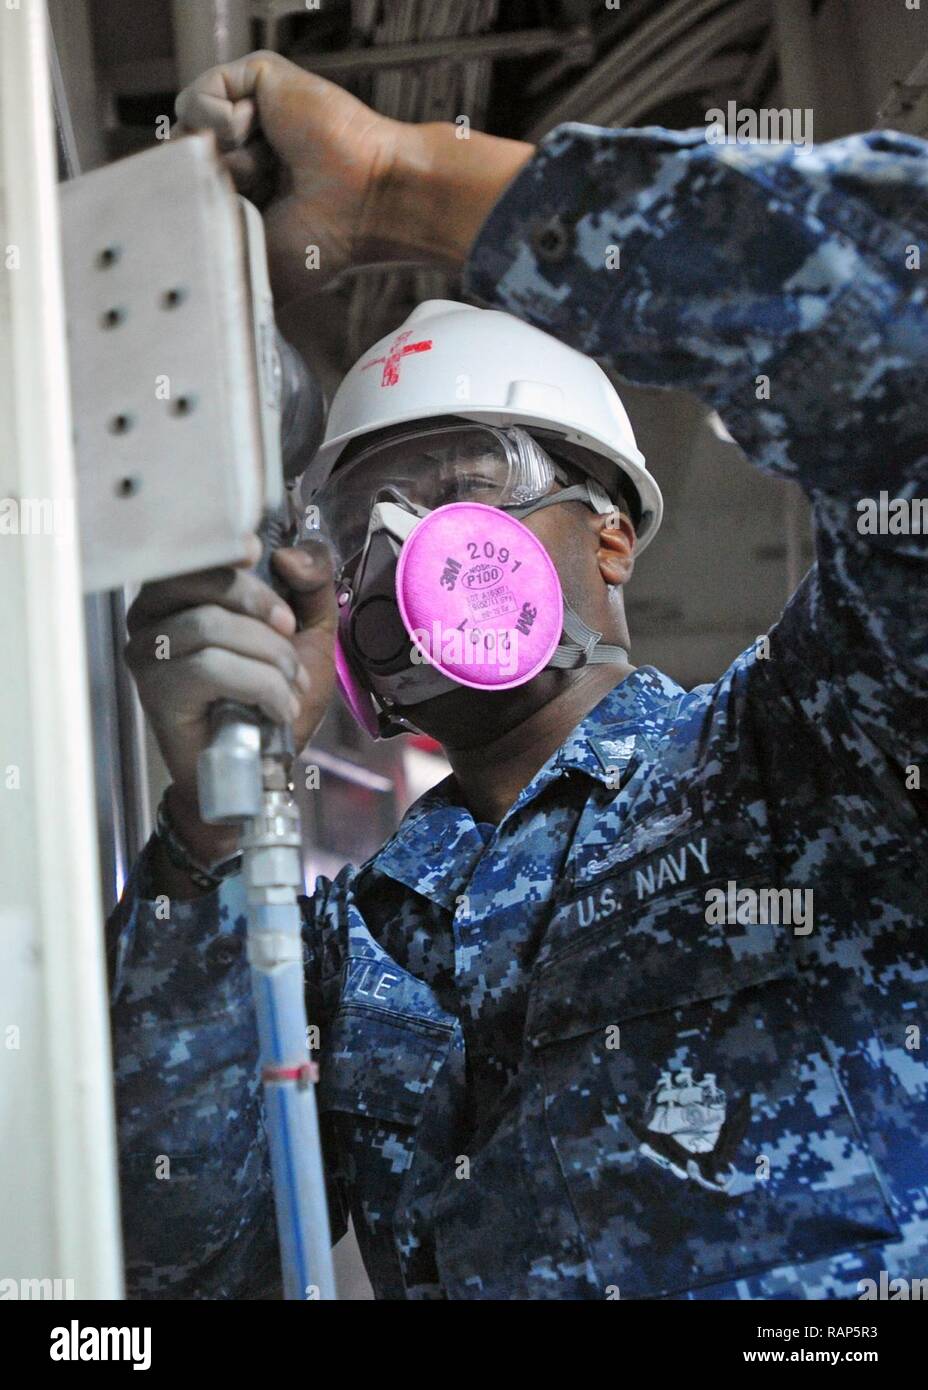 YOKOSUKA, Japan (Feb. 22, 2017) - Hospital Corpsman 3rd Class Patrick Gayle from Jacksonville, Fla., attached to the U.S. 7th Fleet flagship USS Blue Ridge (LCC 19), sands a door frame in the ship's medical waiting area. Blue Ridge is in an extensive maintenance period in order to modernize the ship to continue to serve as a robust communications platform in the U.S. 7th Fleet area of operations. Stock Photo